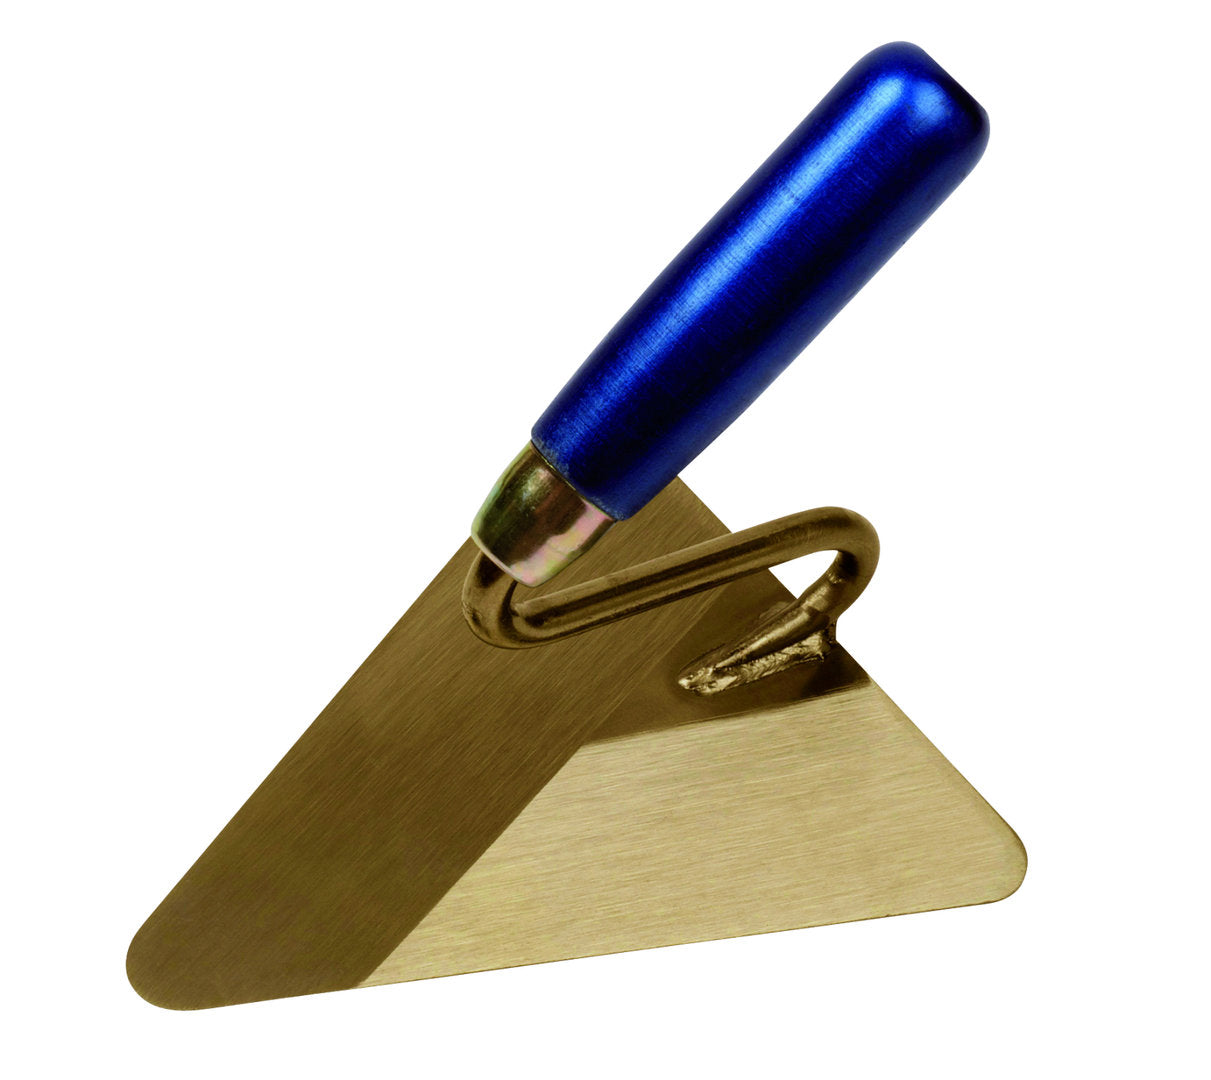 GEDORE GED1390130S - Anti-Spark Trowel 130 mm (2514028)